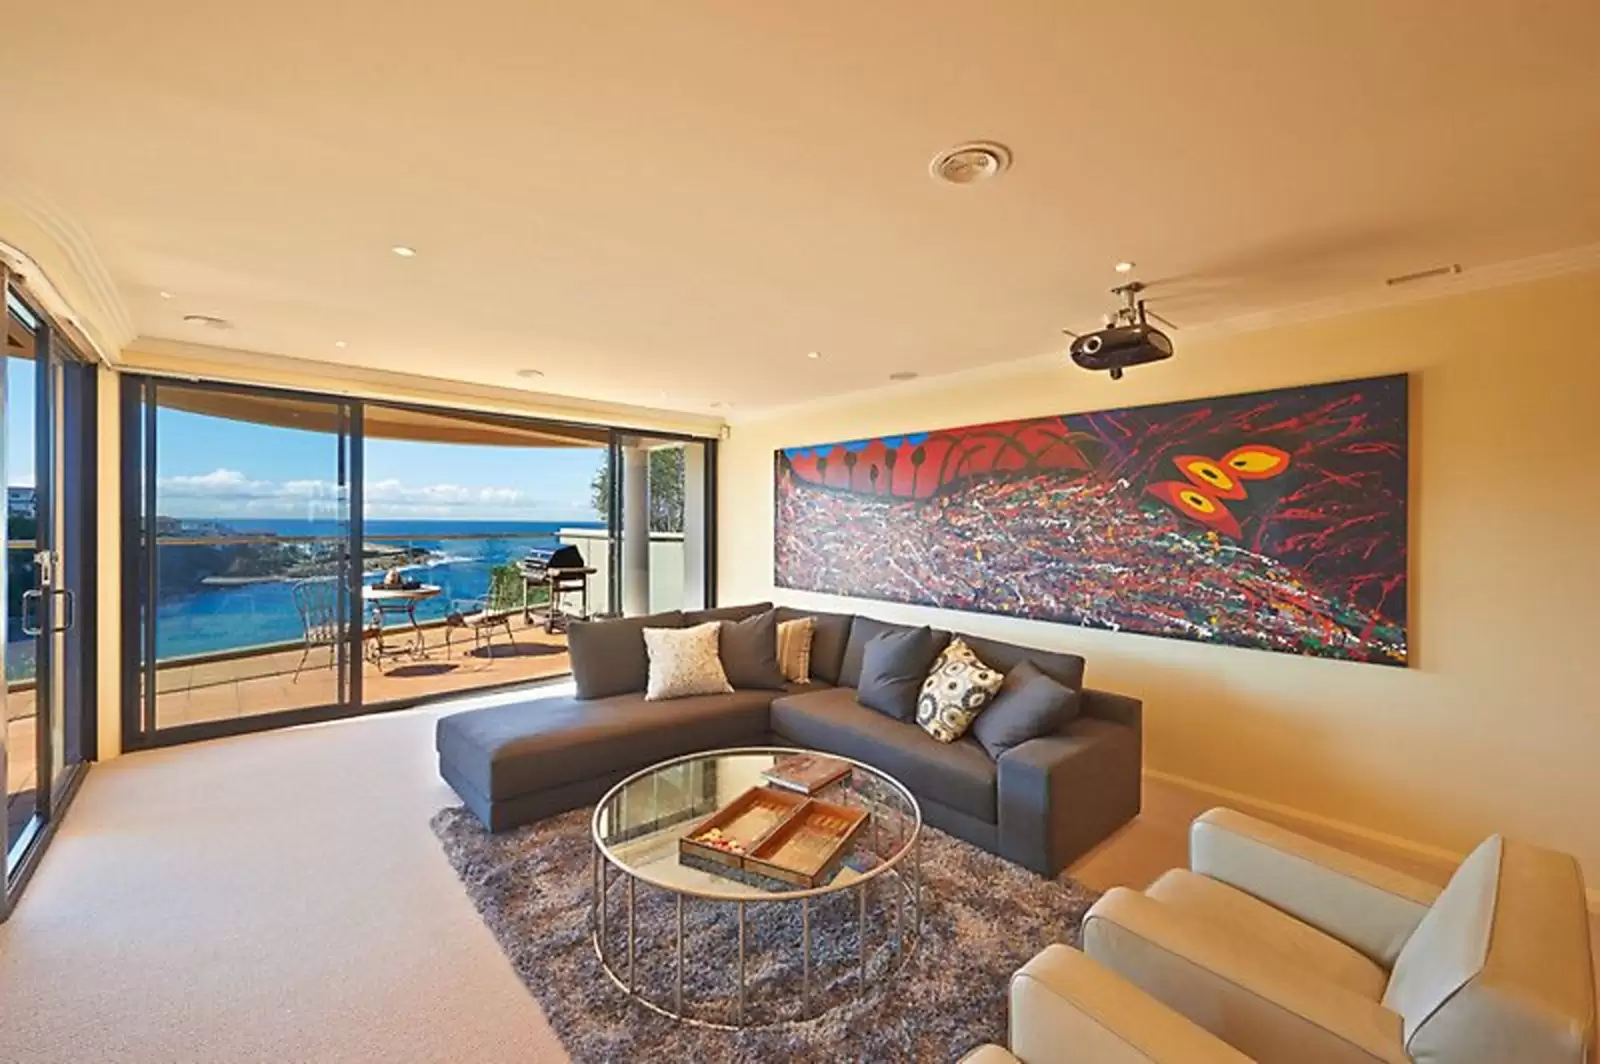 Photo #7: 13 Gordon Avenue, Coogee - Sold by Sydney Sotheby's International Realty